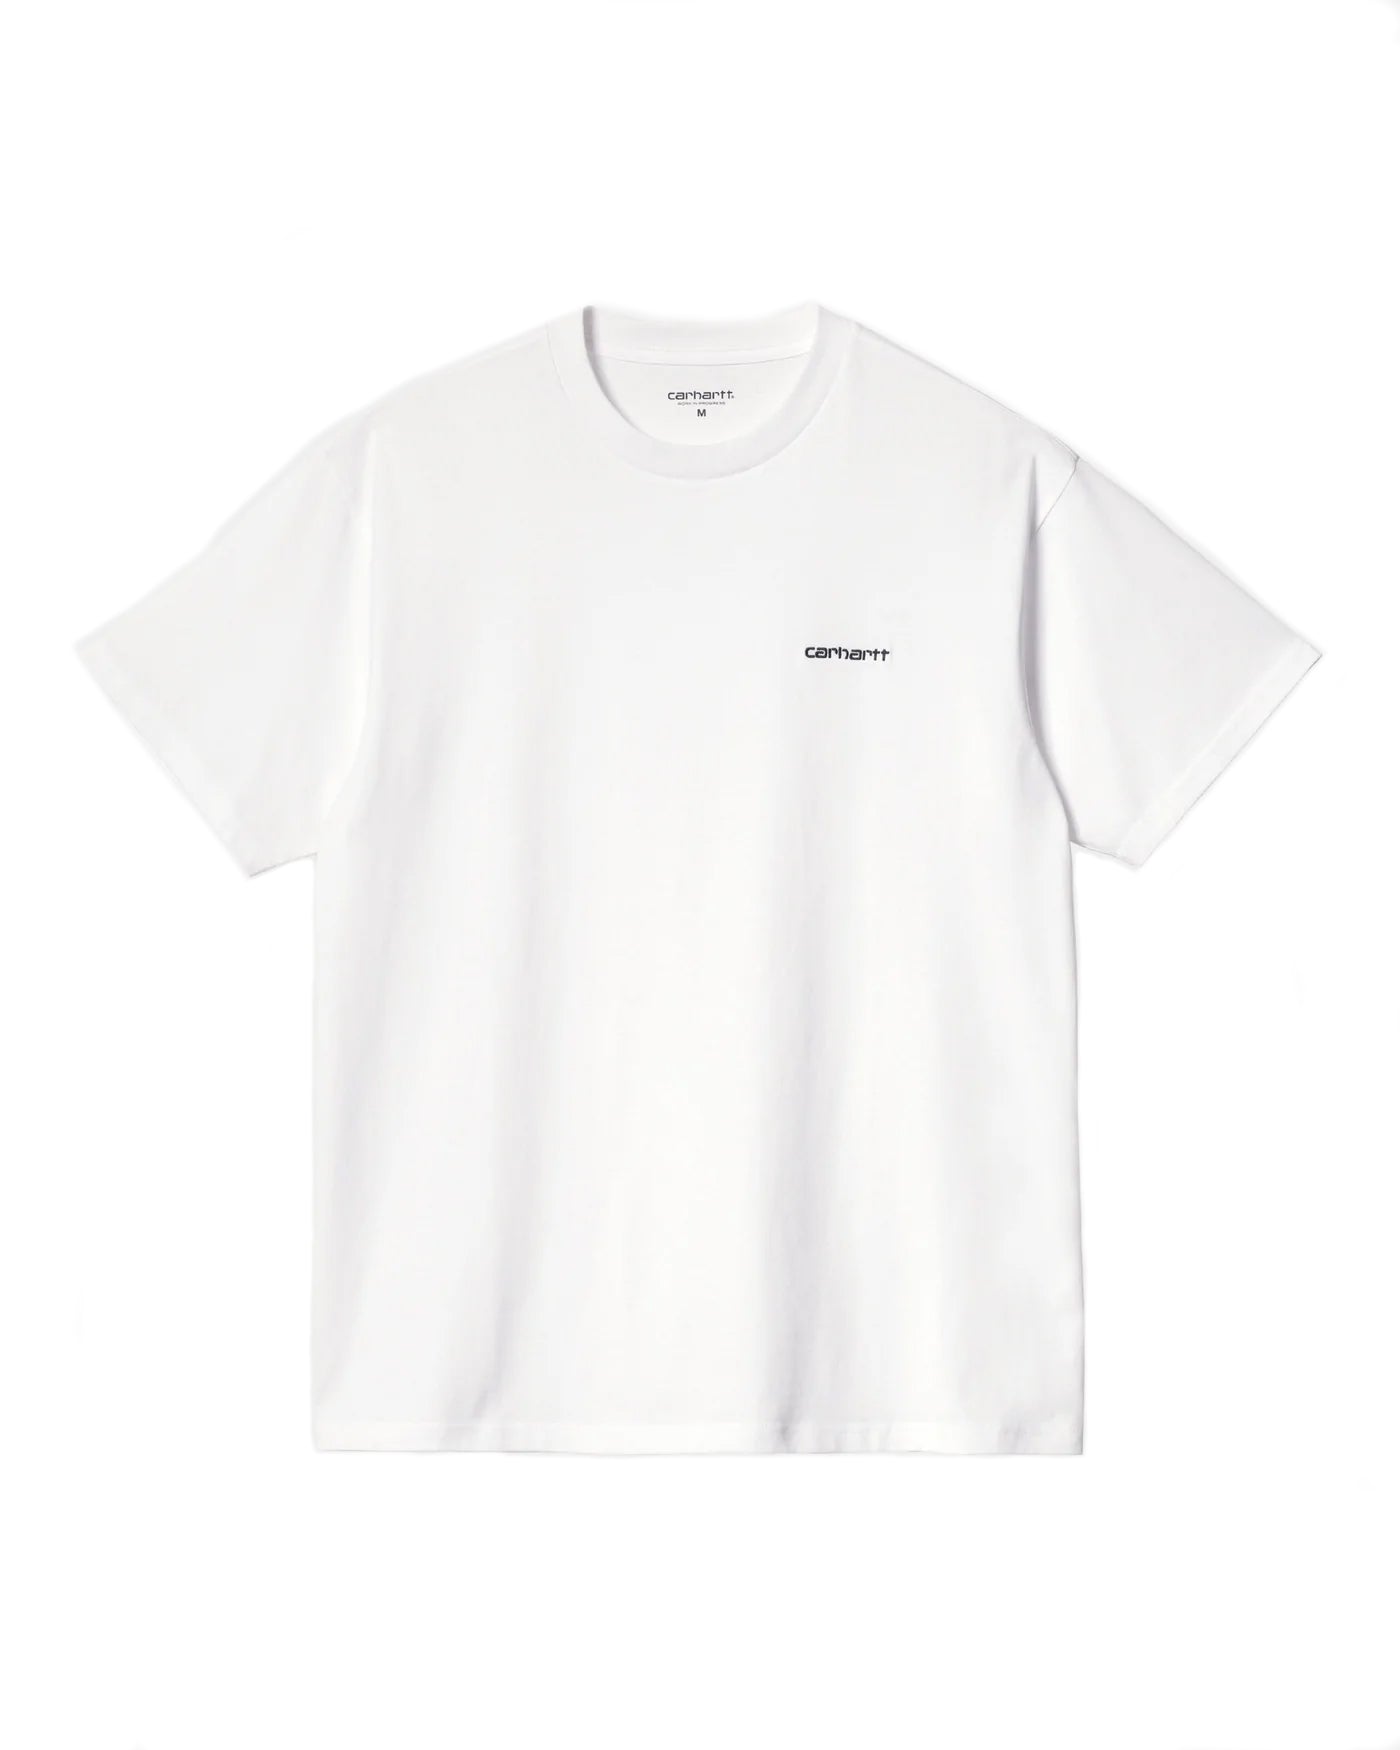 S/S Script Embroidery T-shirt